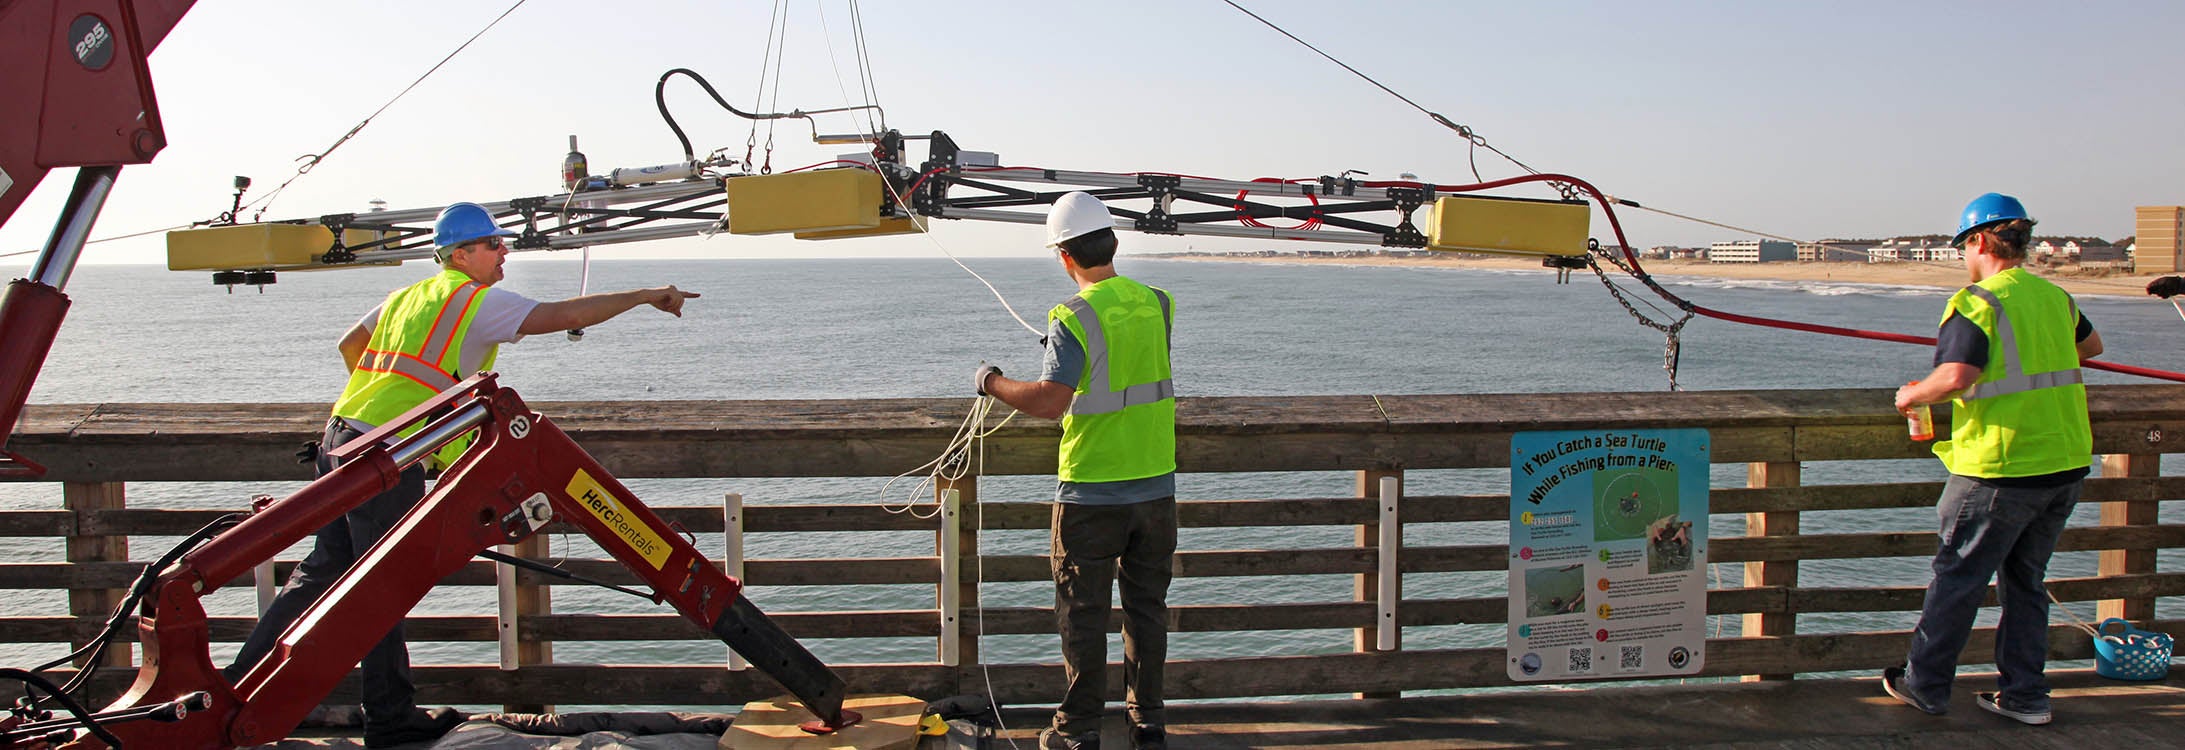 The Mark Zero device is deployed from Jennette’s Pier during the Waves to Water Prize DRINK Finale. (Contributed photos by Daryl Law)